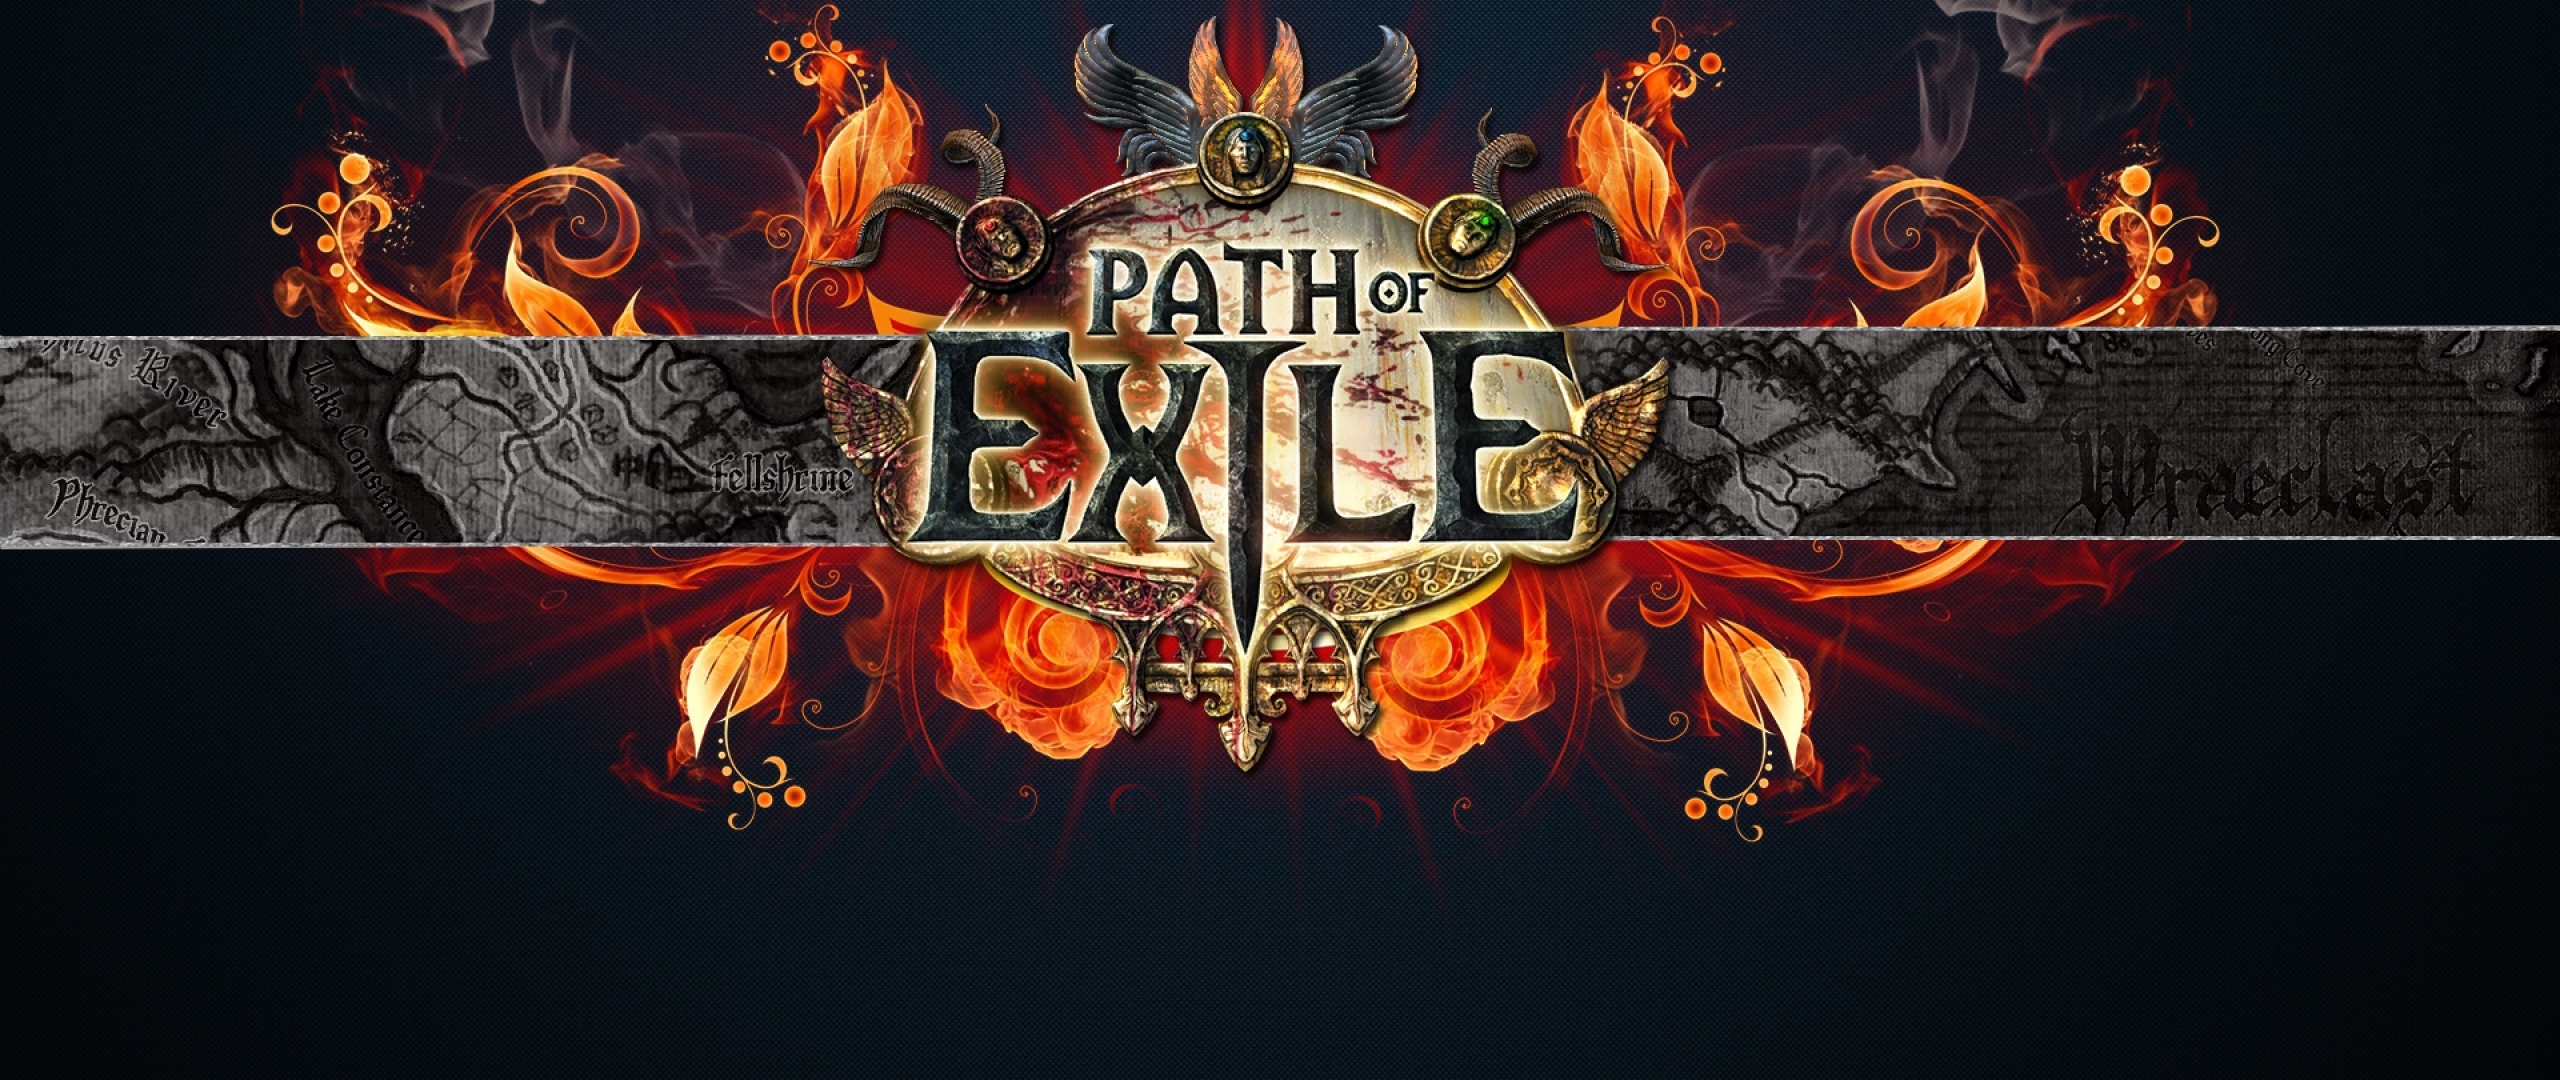 path of exile wallpaper 1920x1080,text,font,games,graphic design,logo